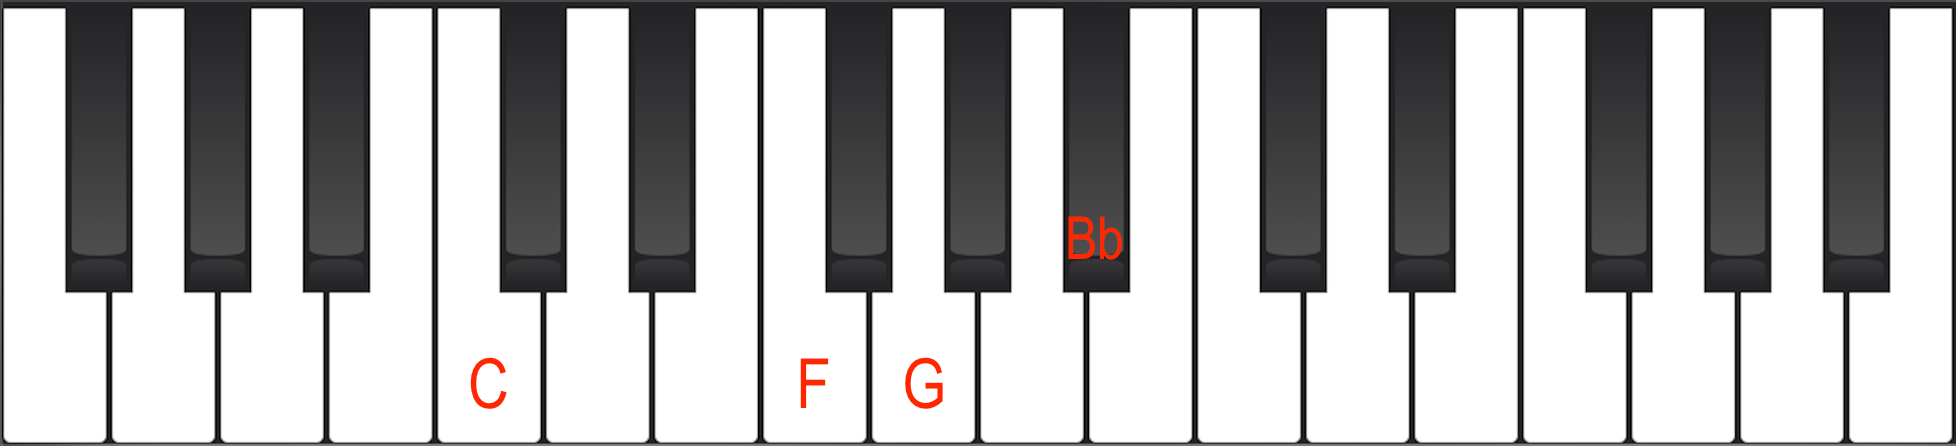 C7sus4 Chord on Piano